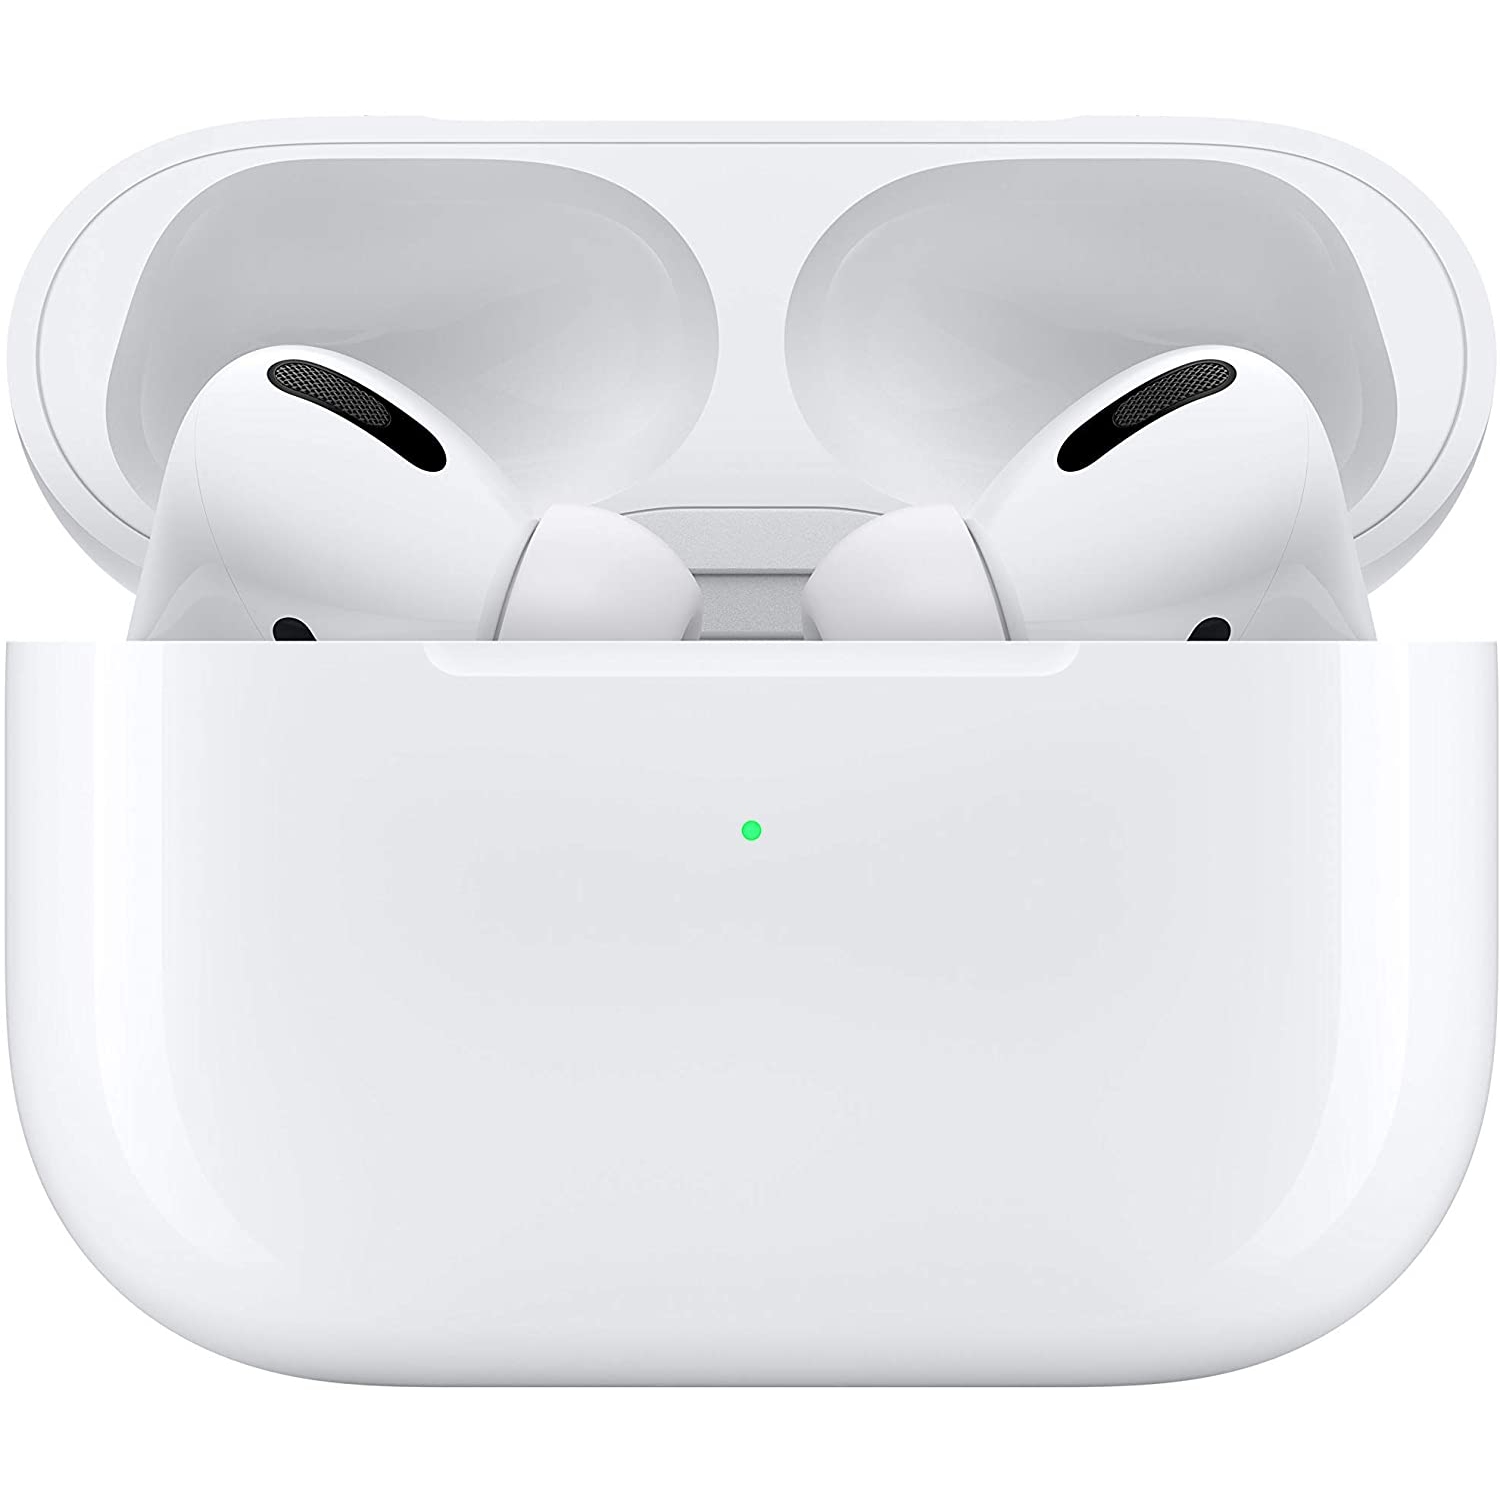 Refurbished (Excellent) - Apple AirPods Pro In-Ear Noise Cancelling Truly Wireless Headphones - White - Certified Refurbished